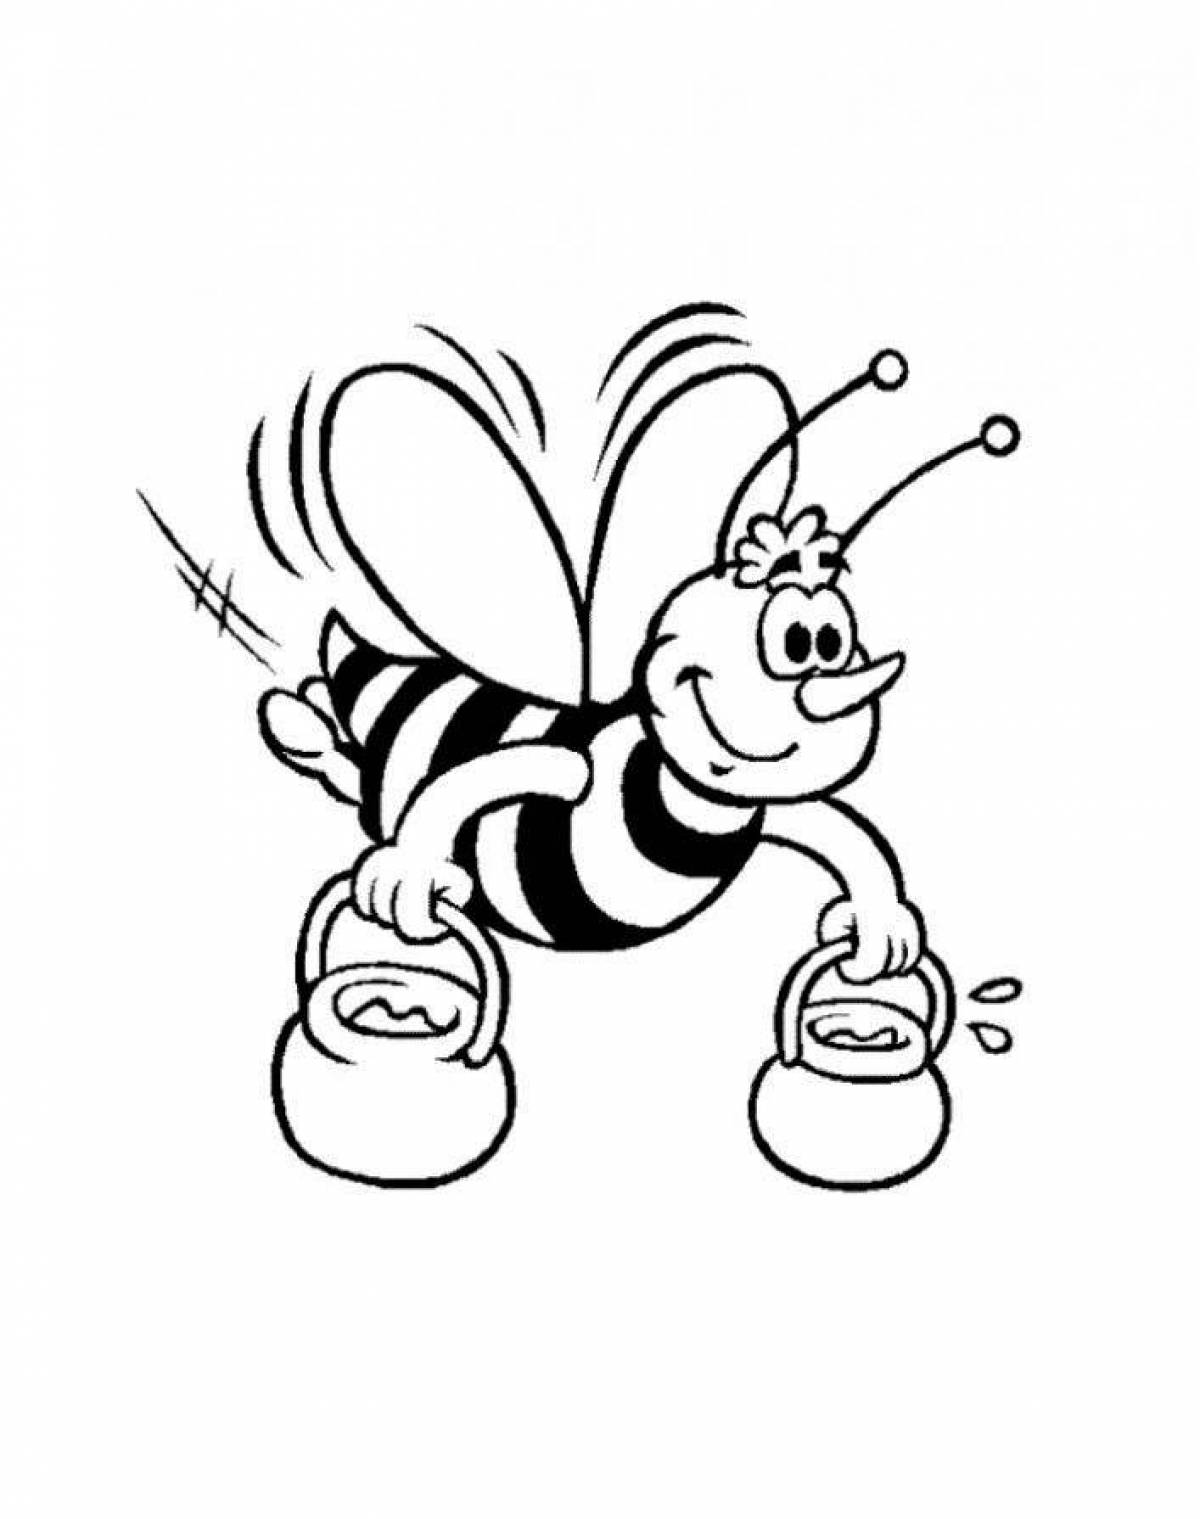 Colorful bee coloring page for kids